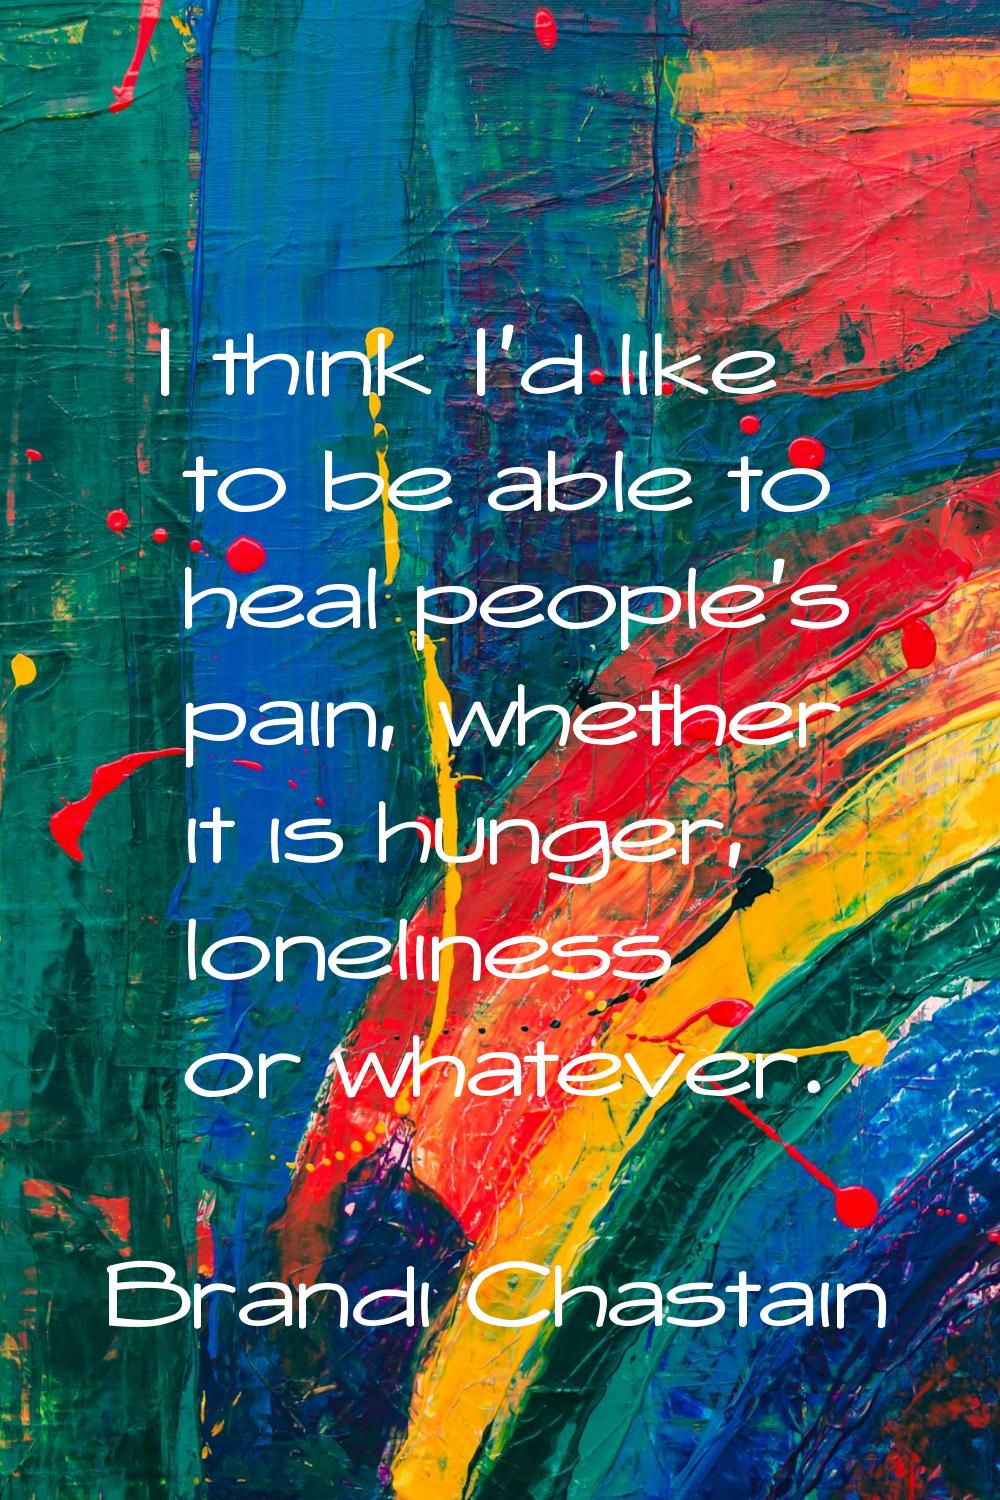 I think I'd like to be able to heal people's pain, whether it is hunger, loneliness or whatever.